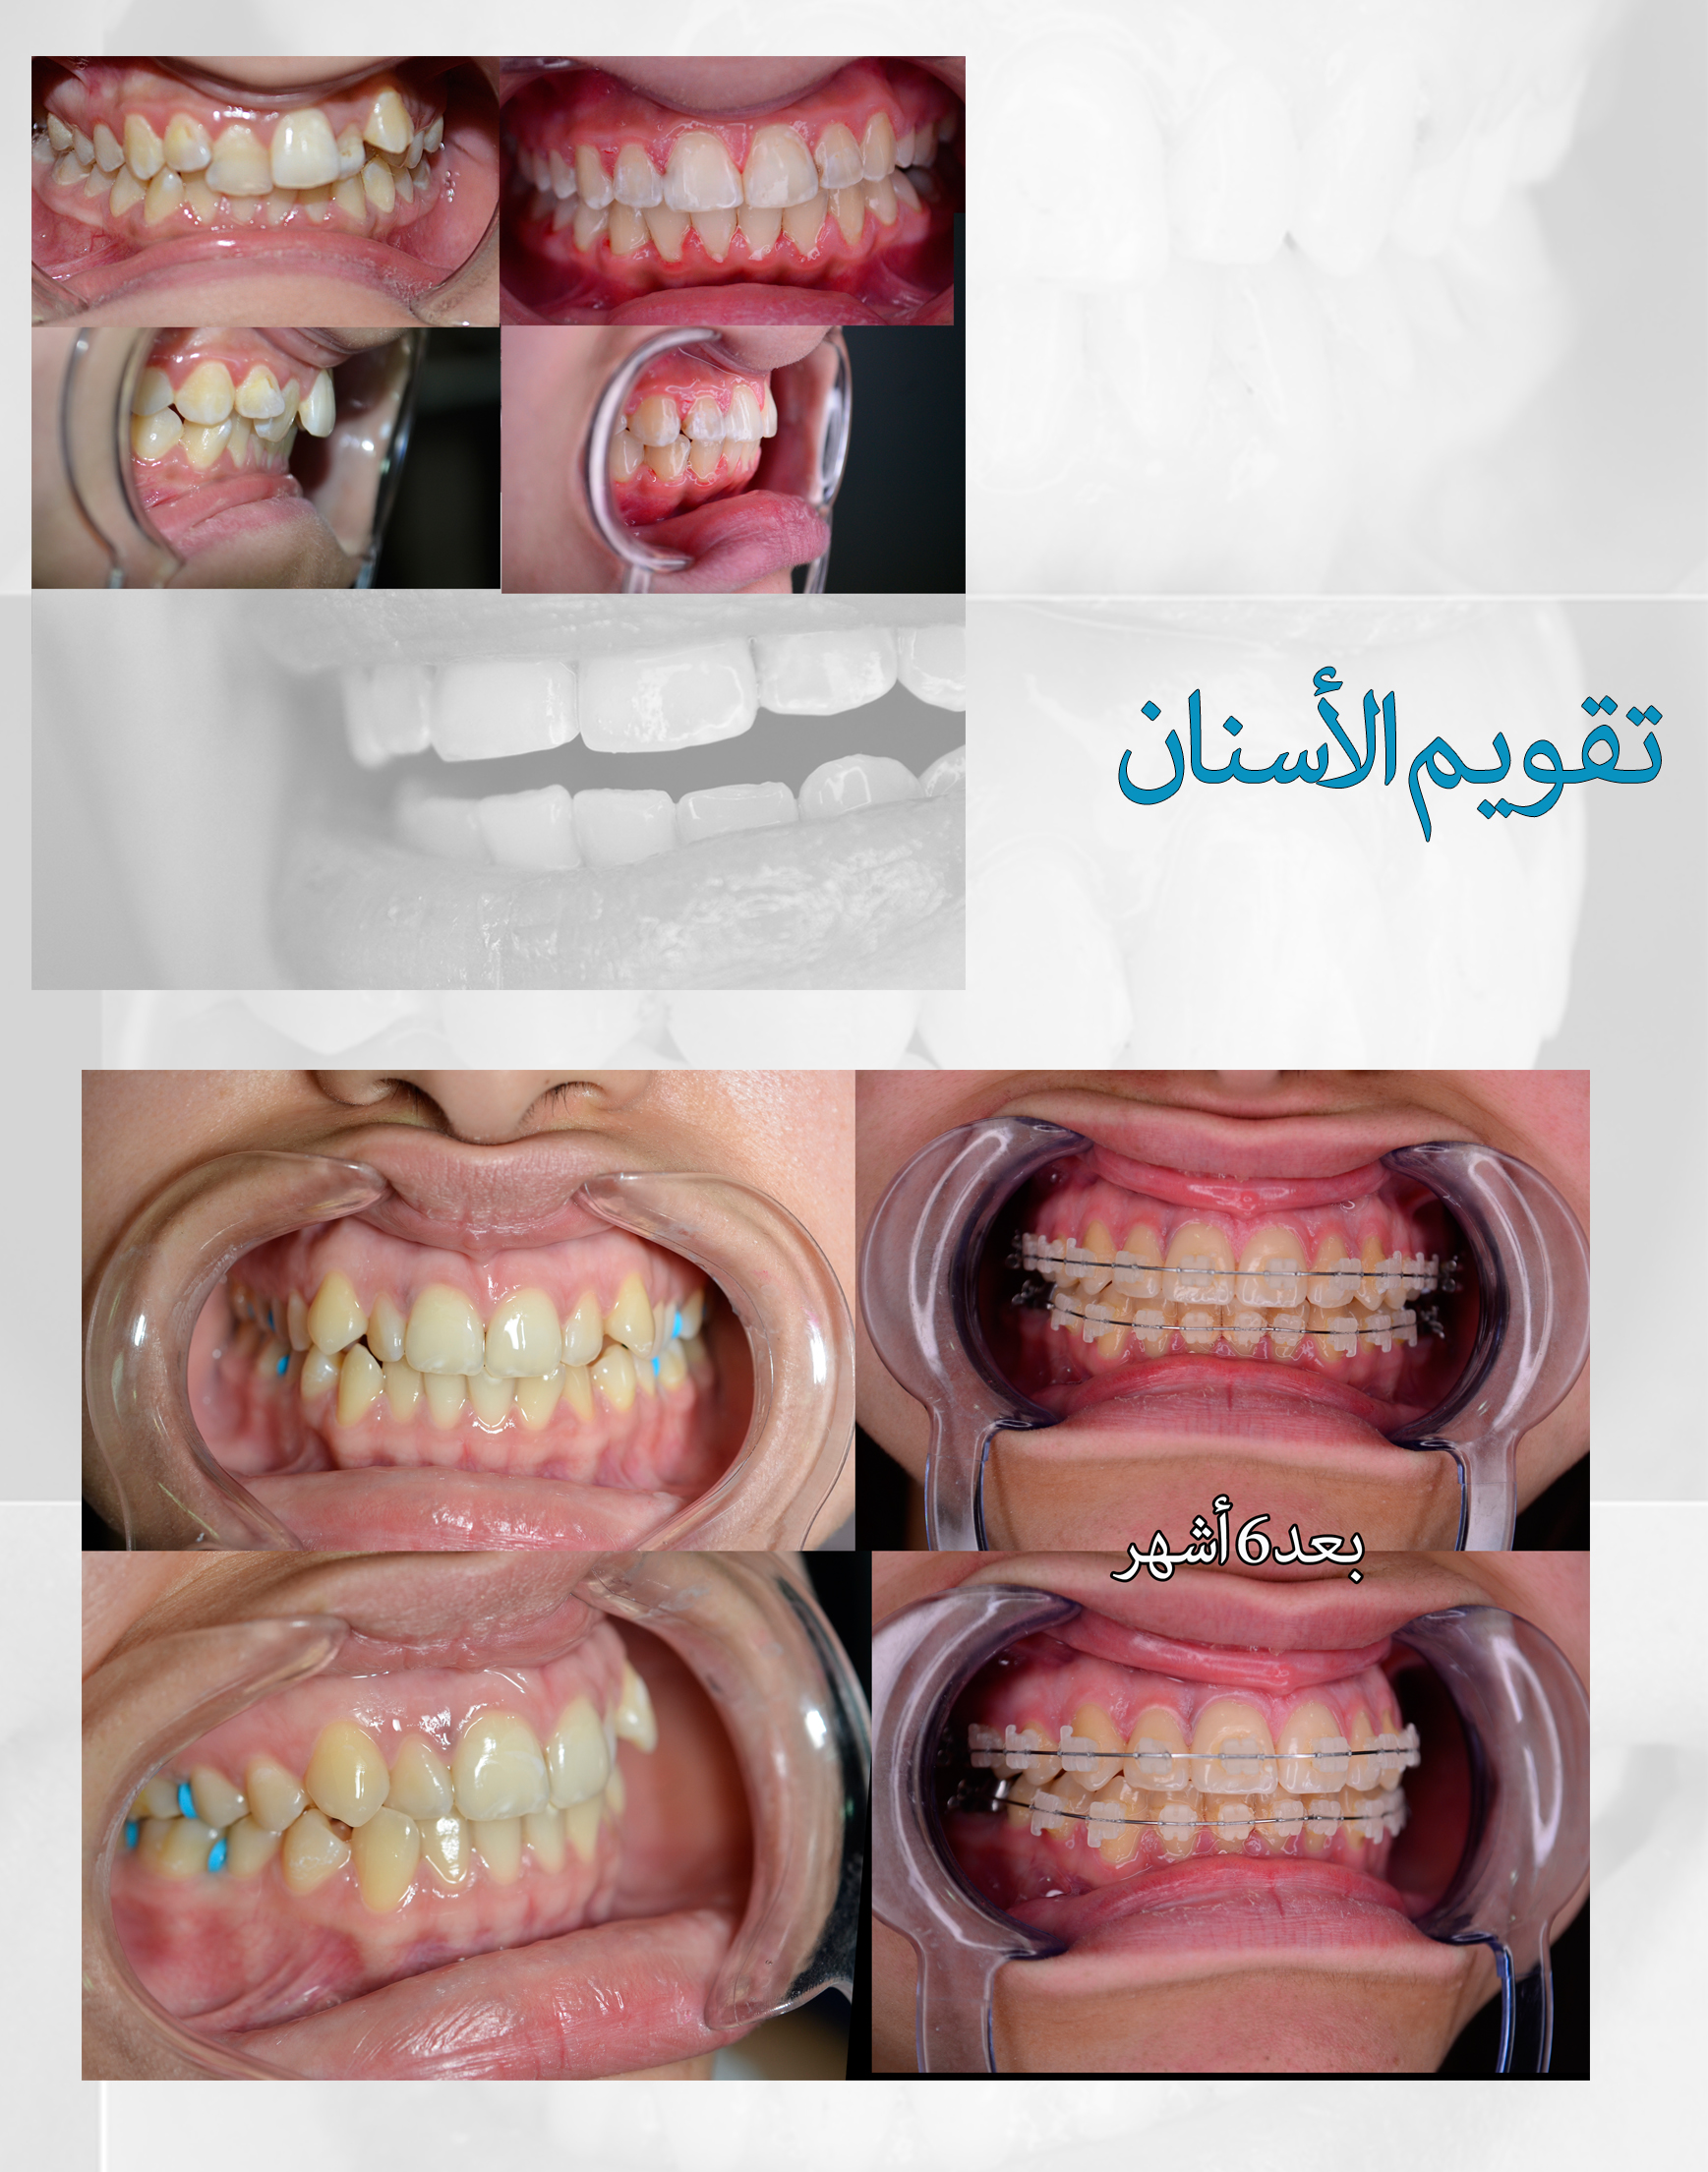 Advanced Dental Care for Treatment & Cosmetic Dentistry